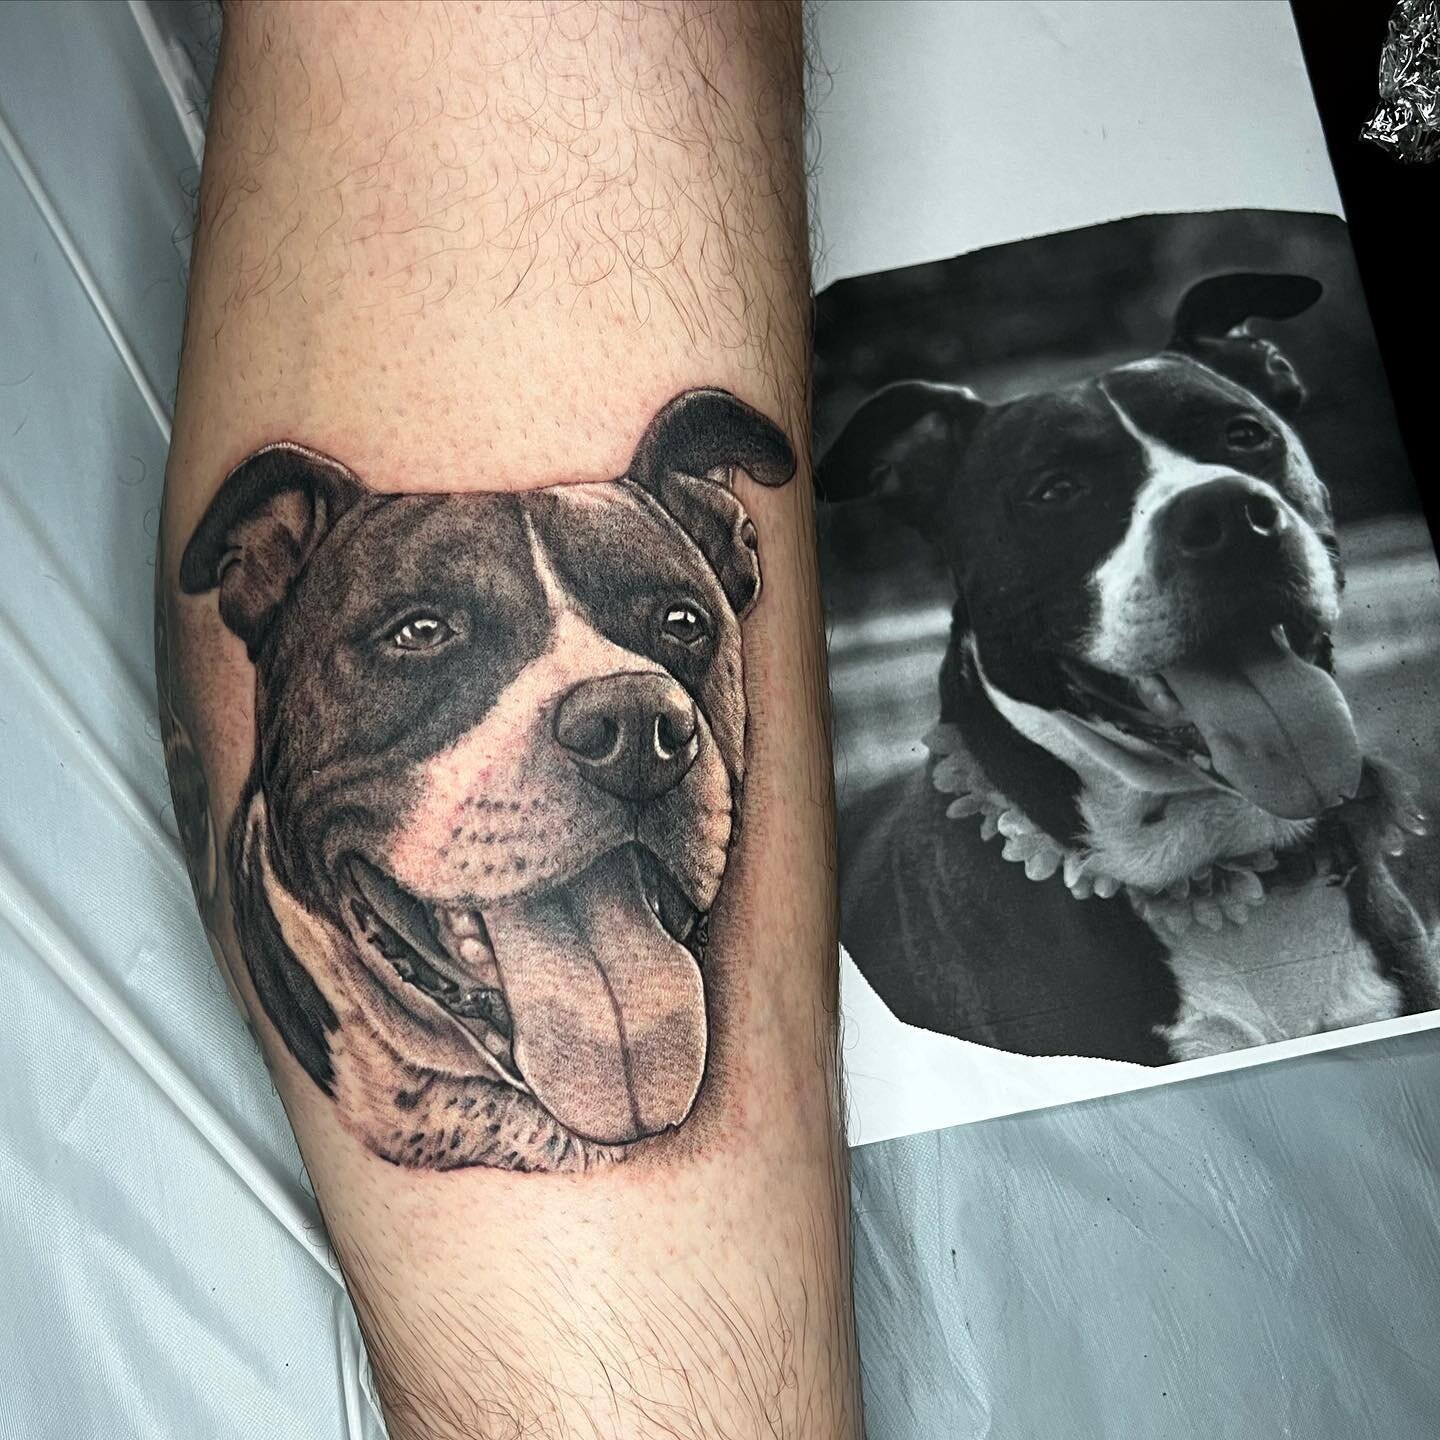 Doggie portrait on @mutt_cuts thank you for the trust and if you are looking for a spot to get your fur friend cleaned up go to @mutt_cuts 
#dogportrait #dogportraittattoo #portraittattoo